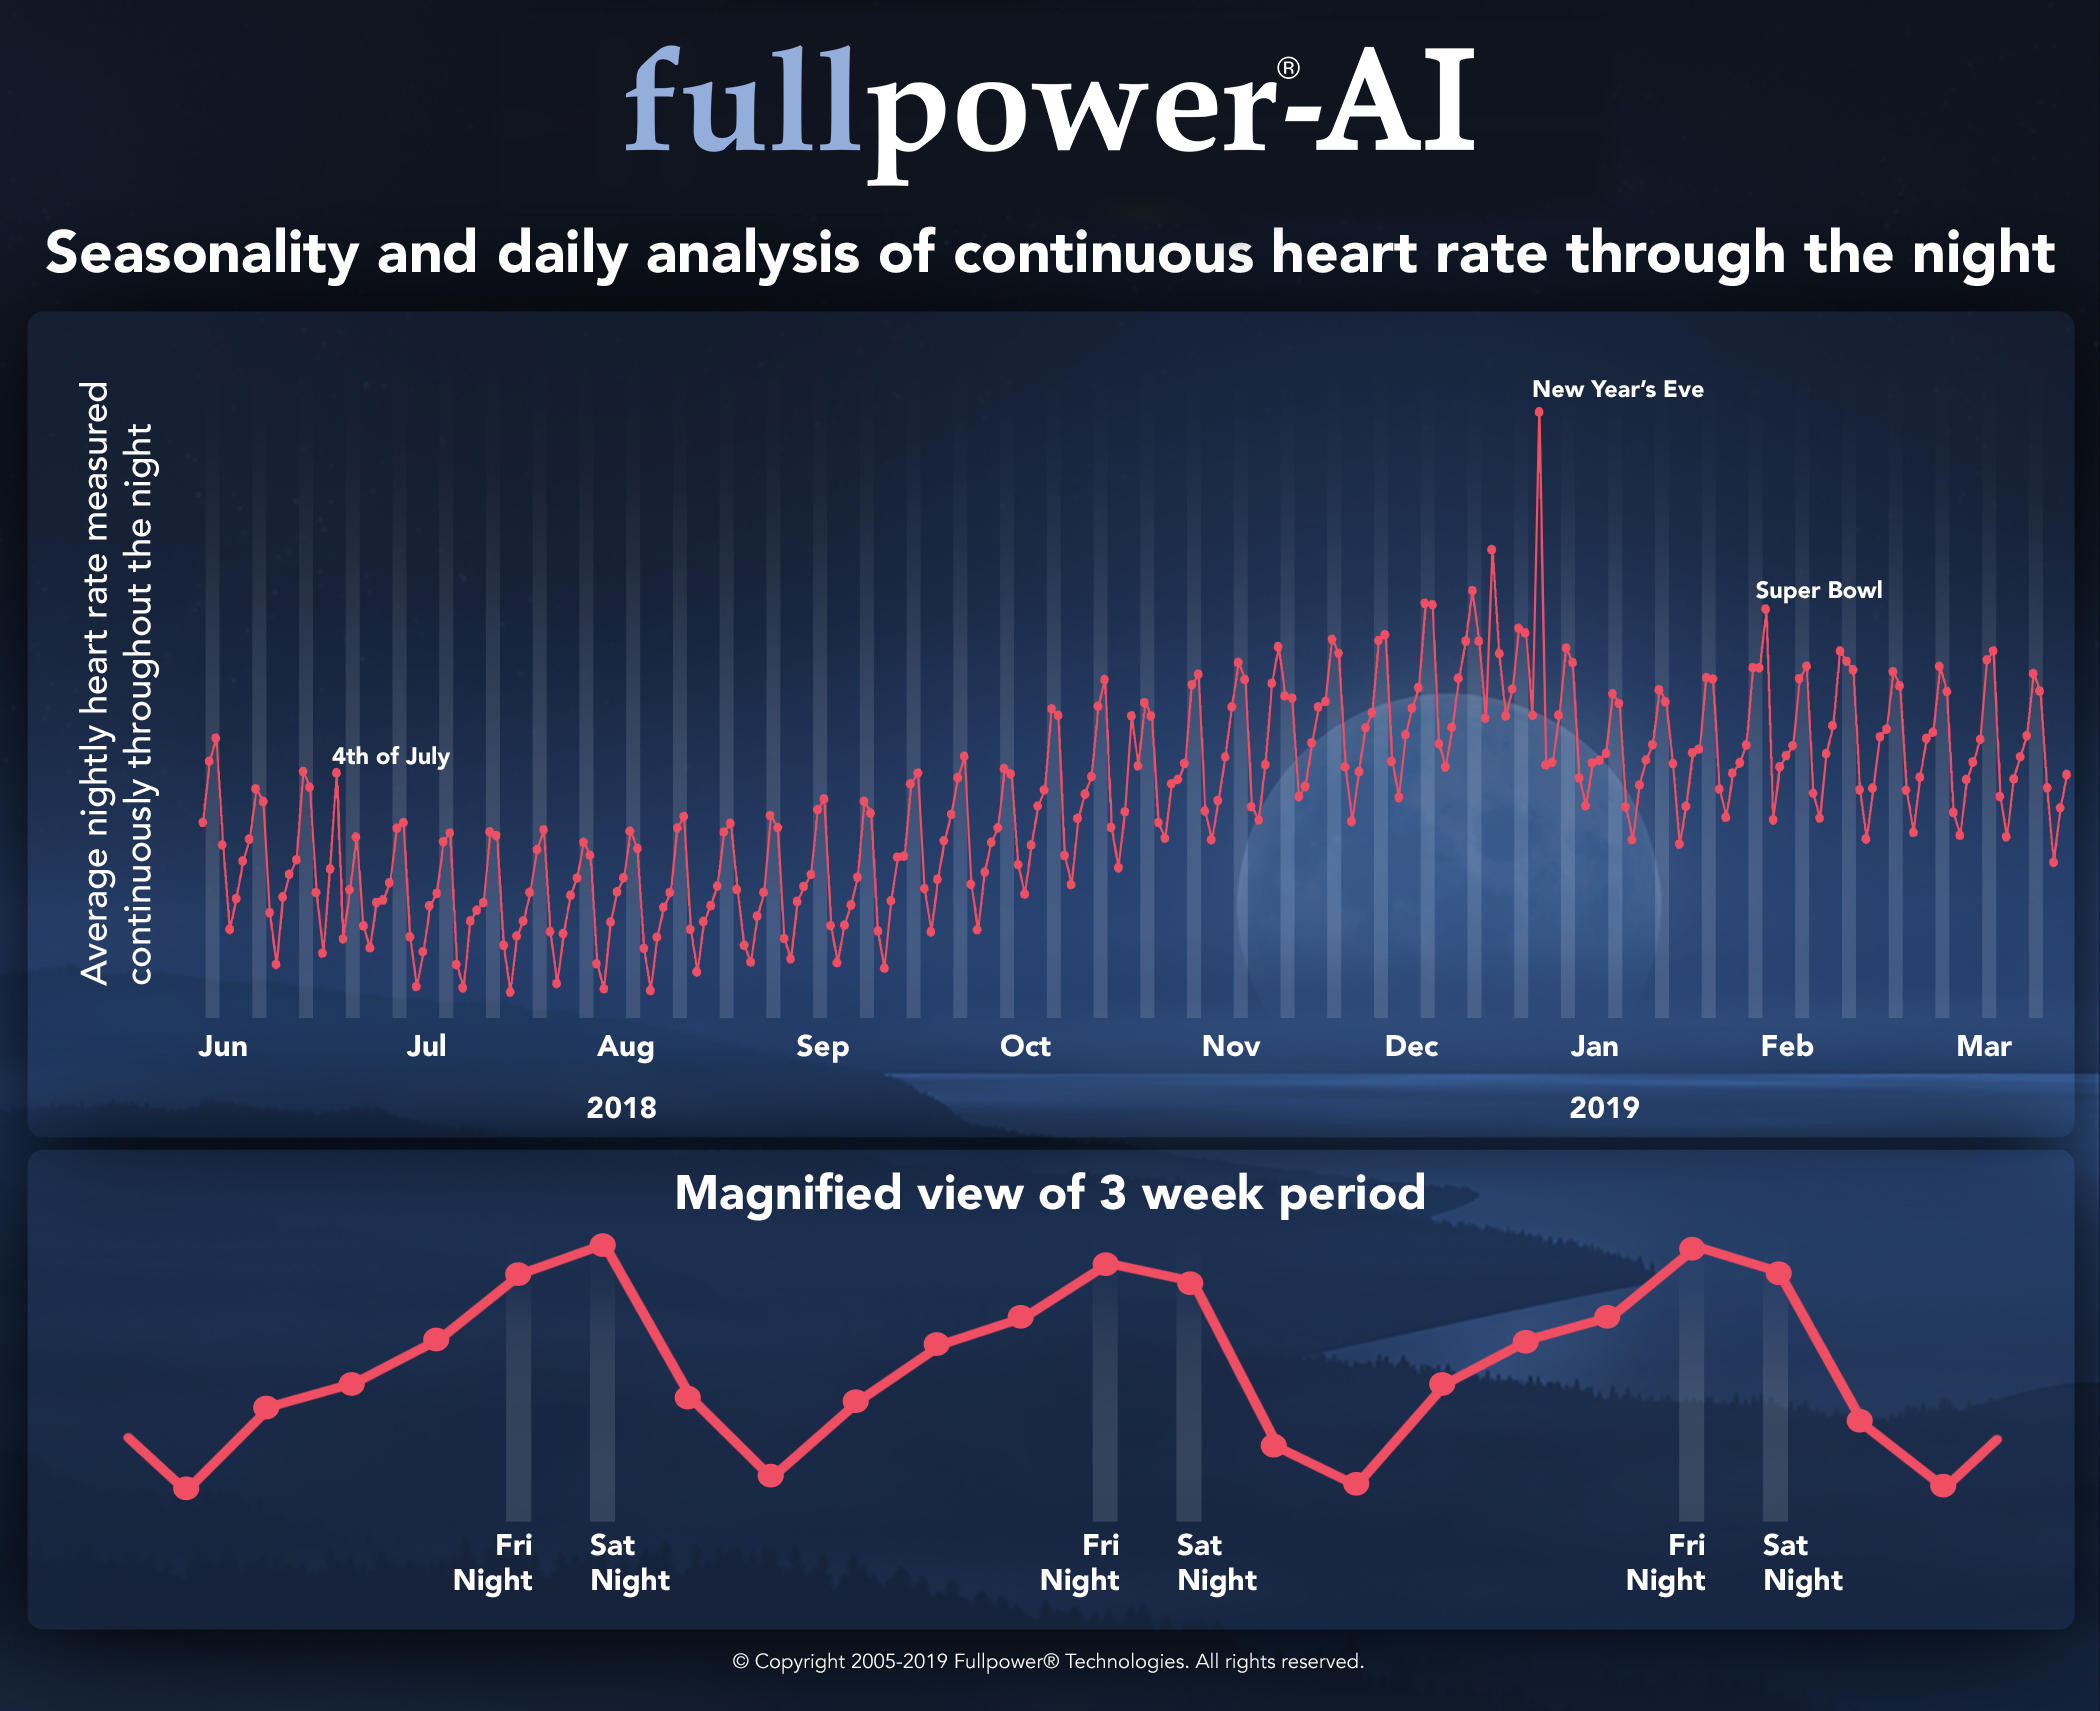 Seasonality and Daily Analysis of Continuous Heart Rate Through the Night